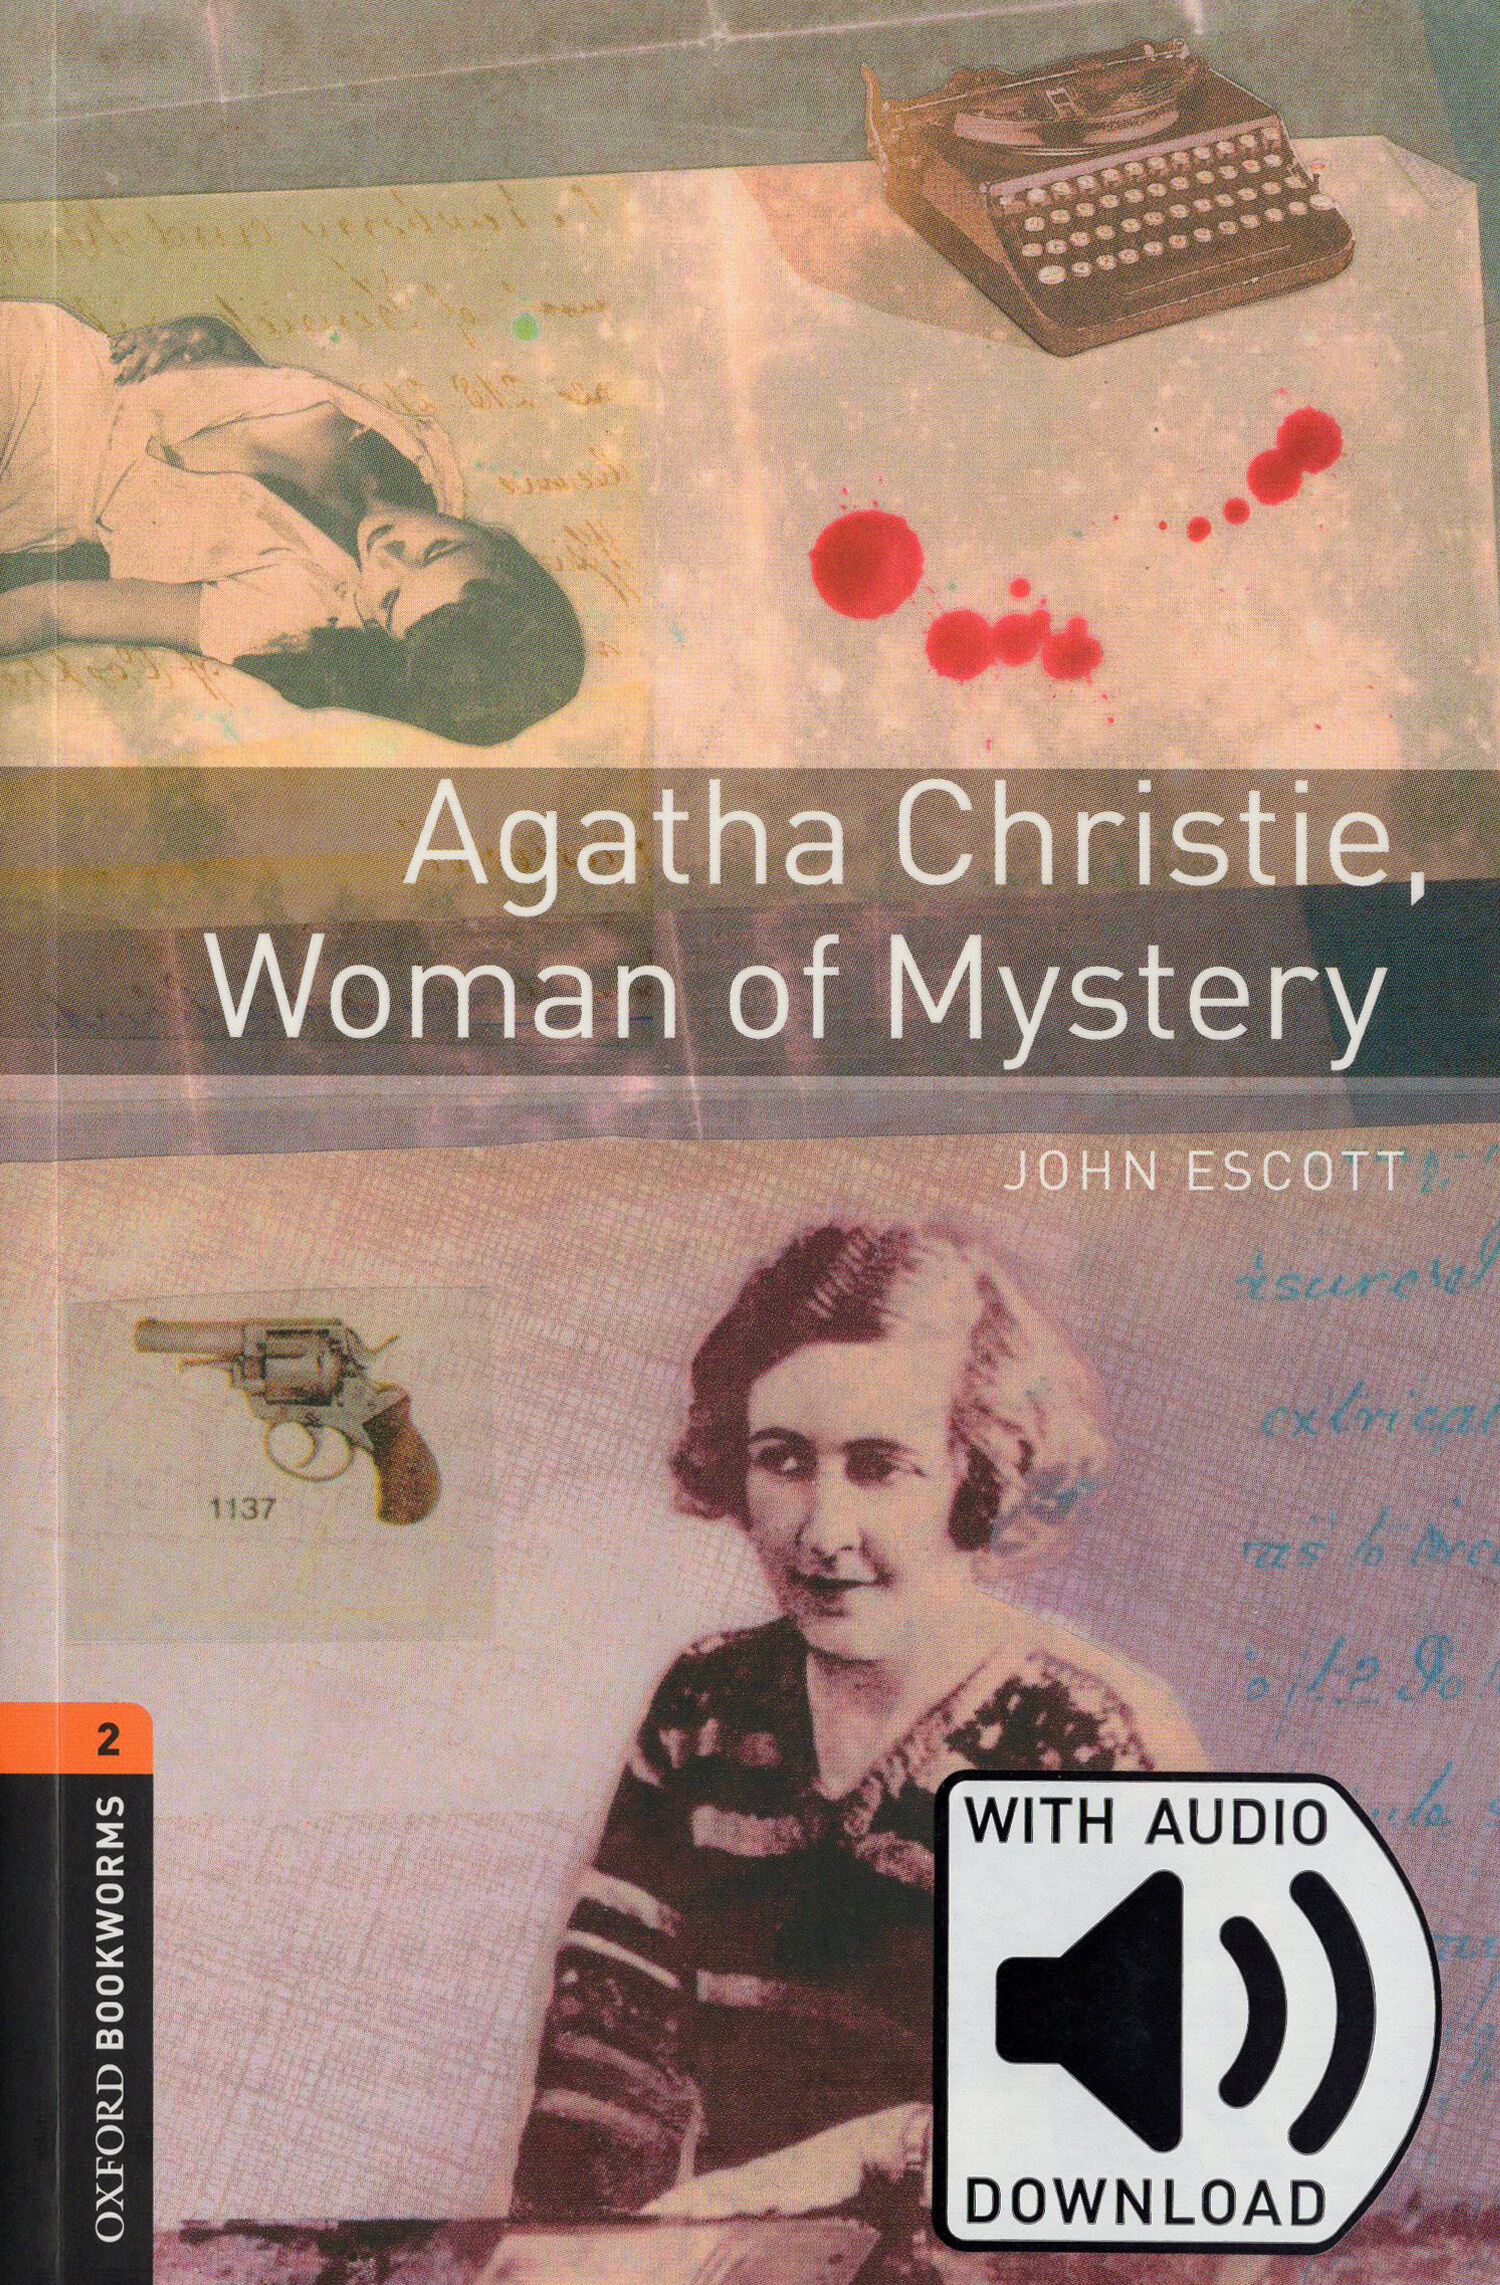 Oxford Bookworms Library Level 2 : Agatha Christie, Woman of Mystery (Paperback + MP3 download, 3rd Edition)